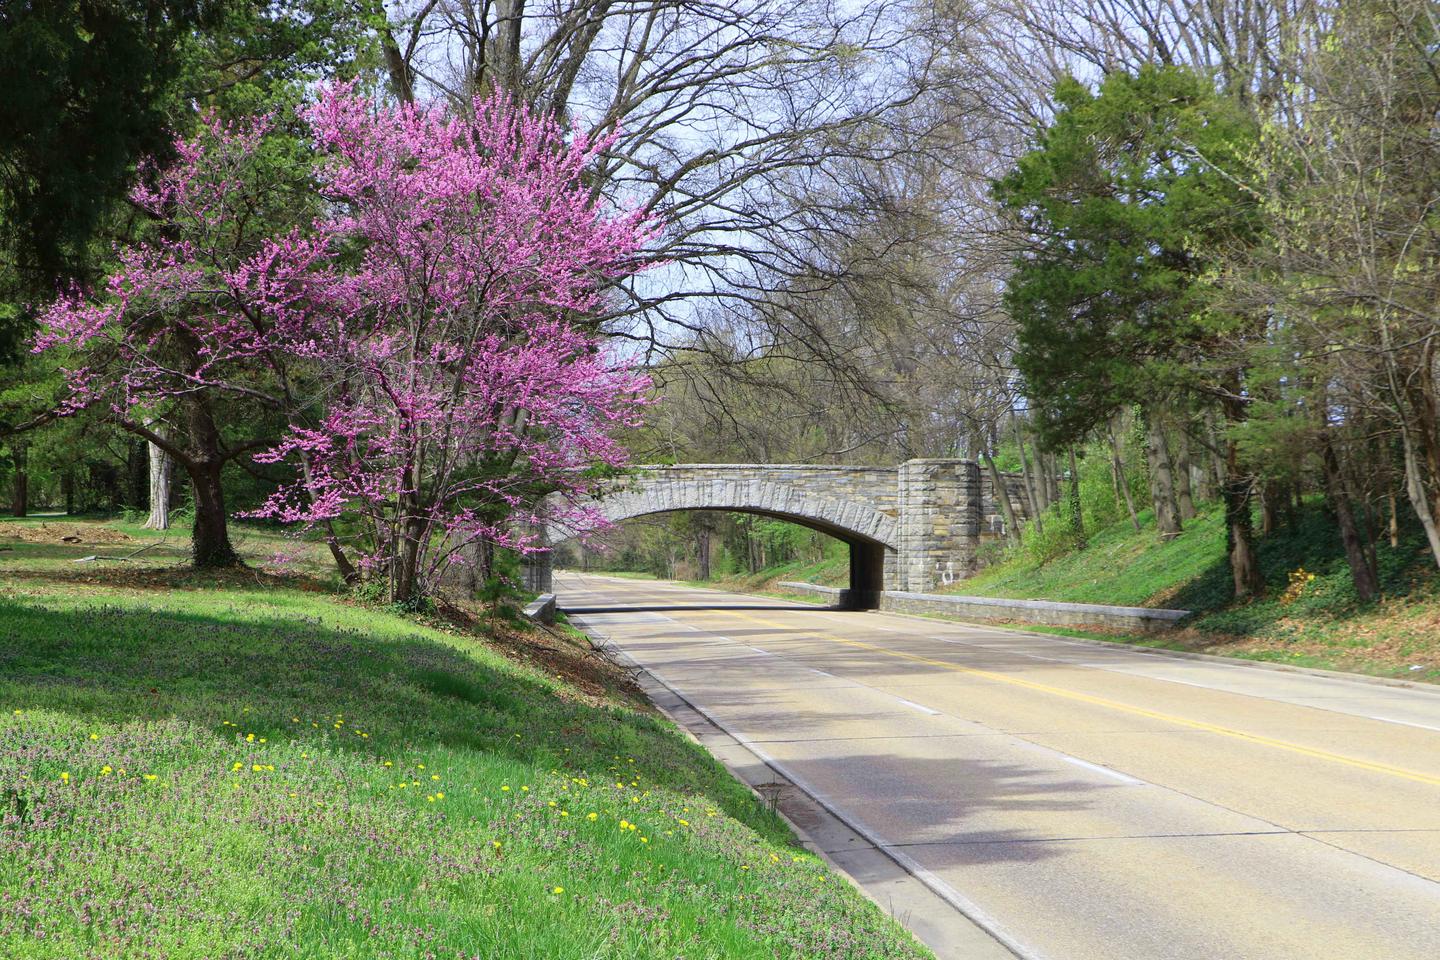 Preview photo of George Washington Memorial Parkway